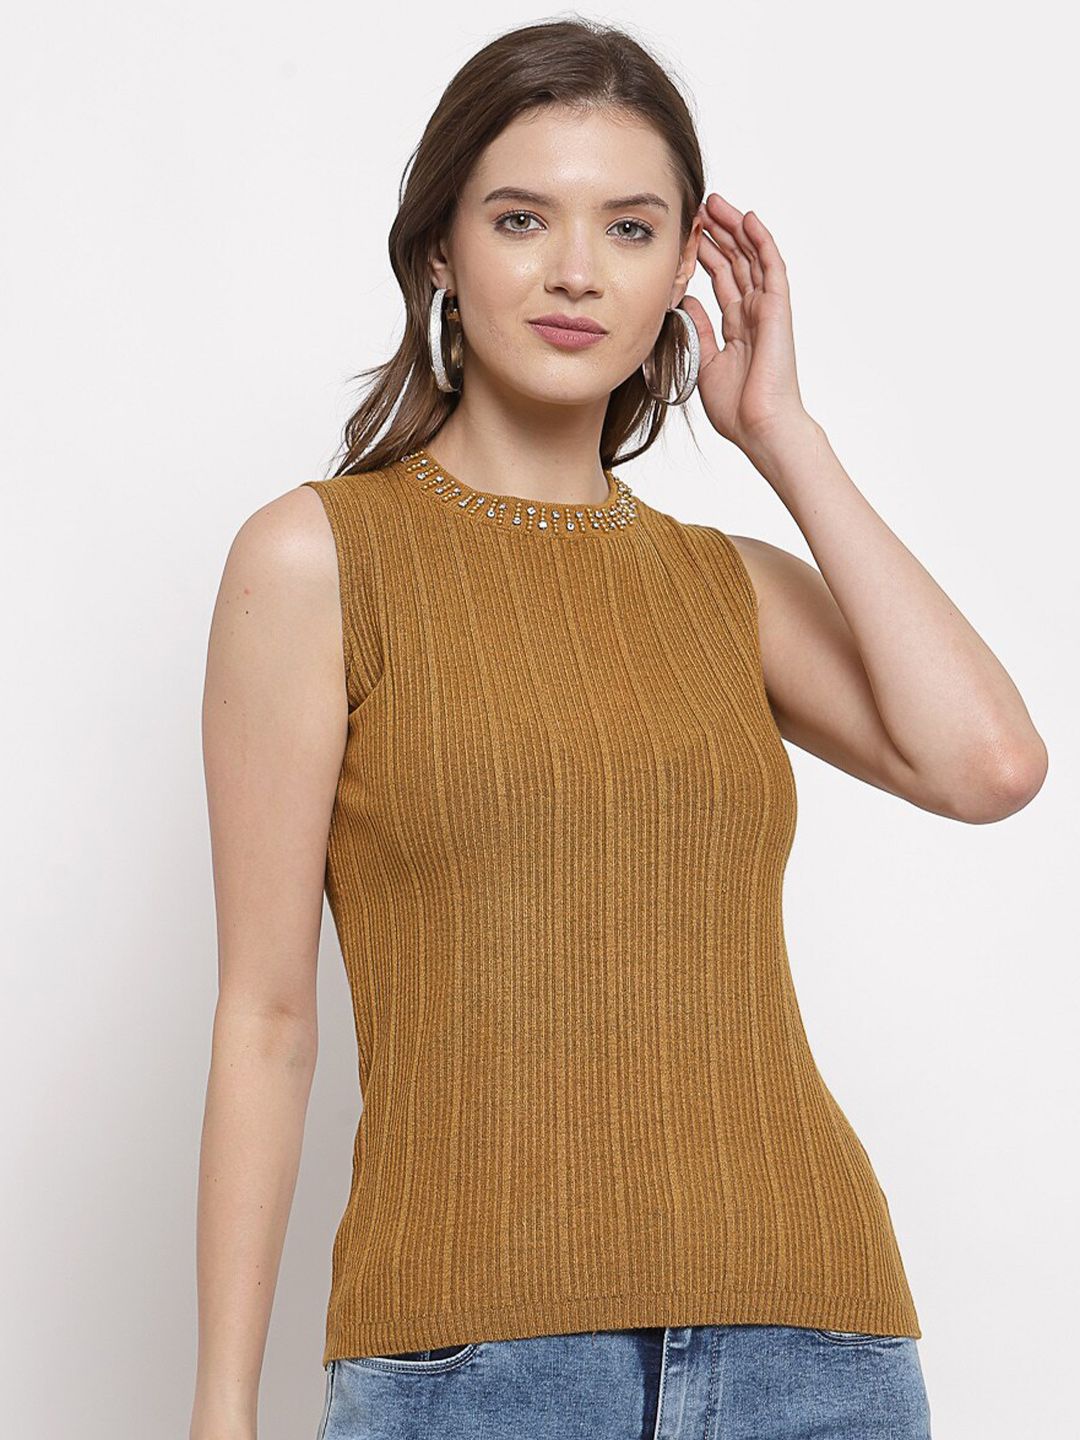 Mafadeny Women Mustard Striped Pullover with Embellished Detail Price in India